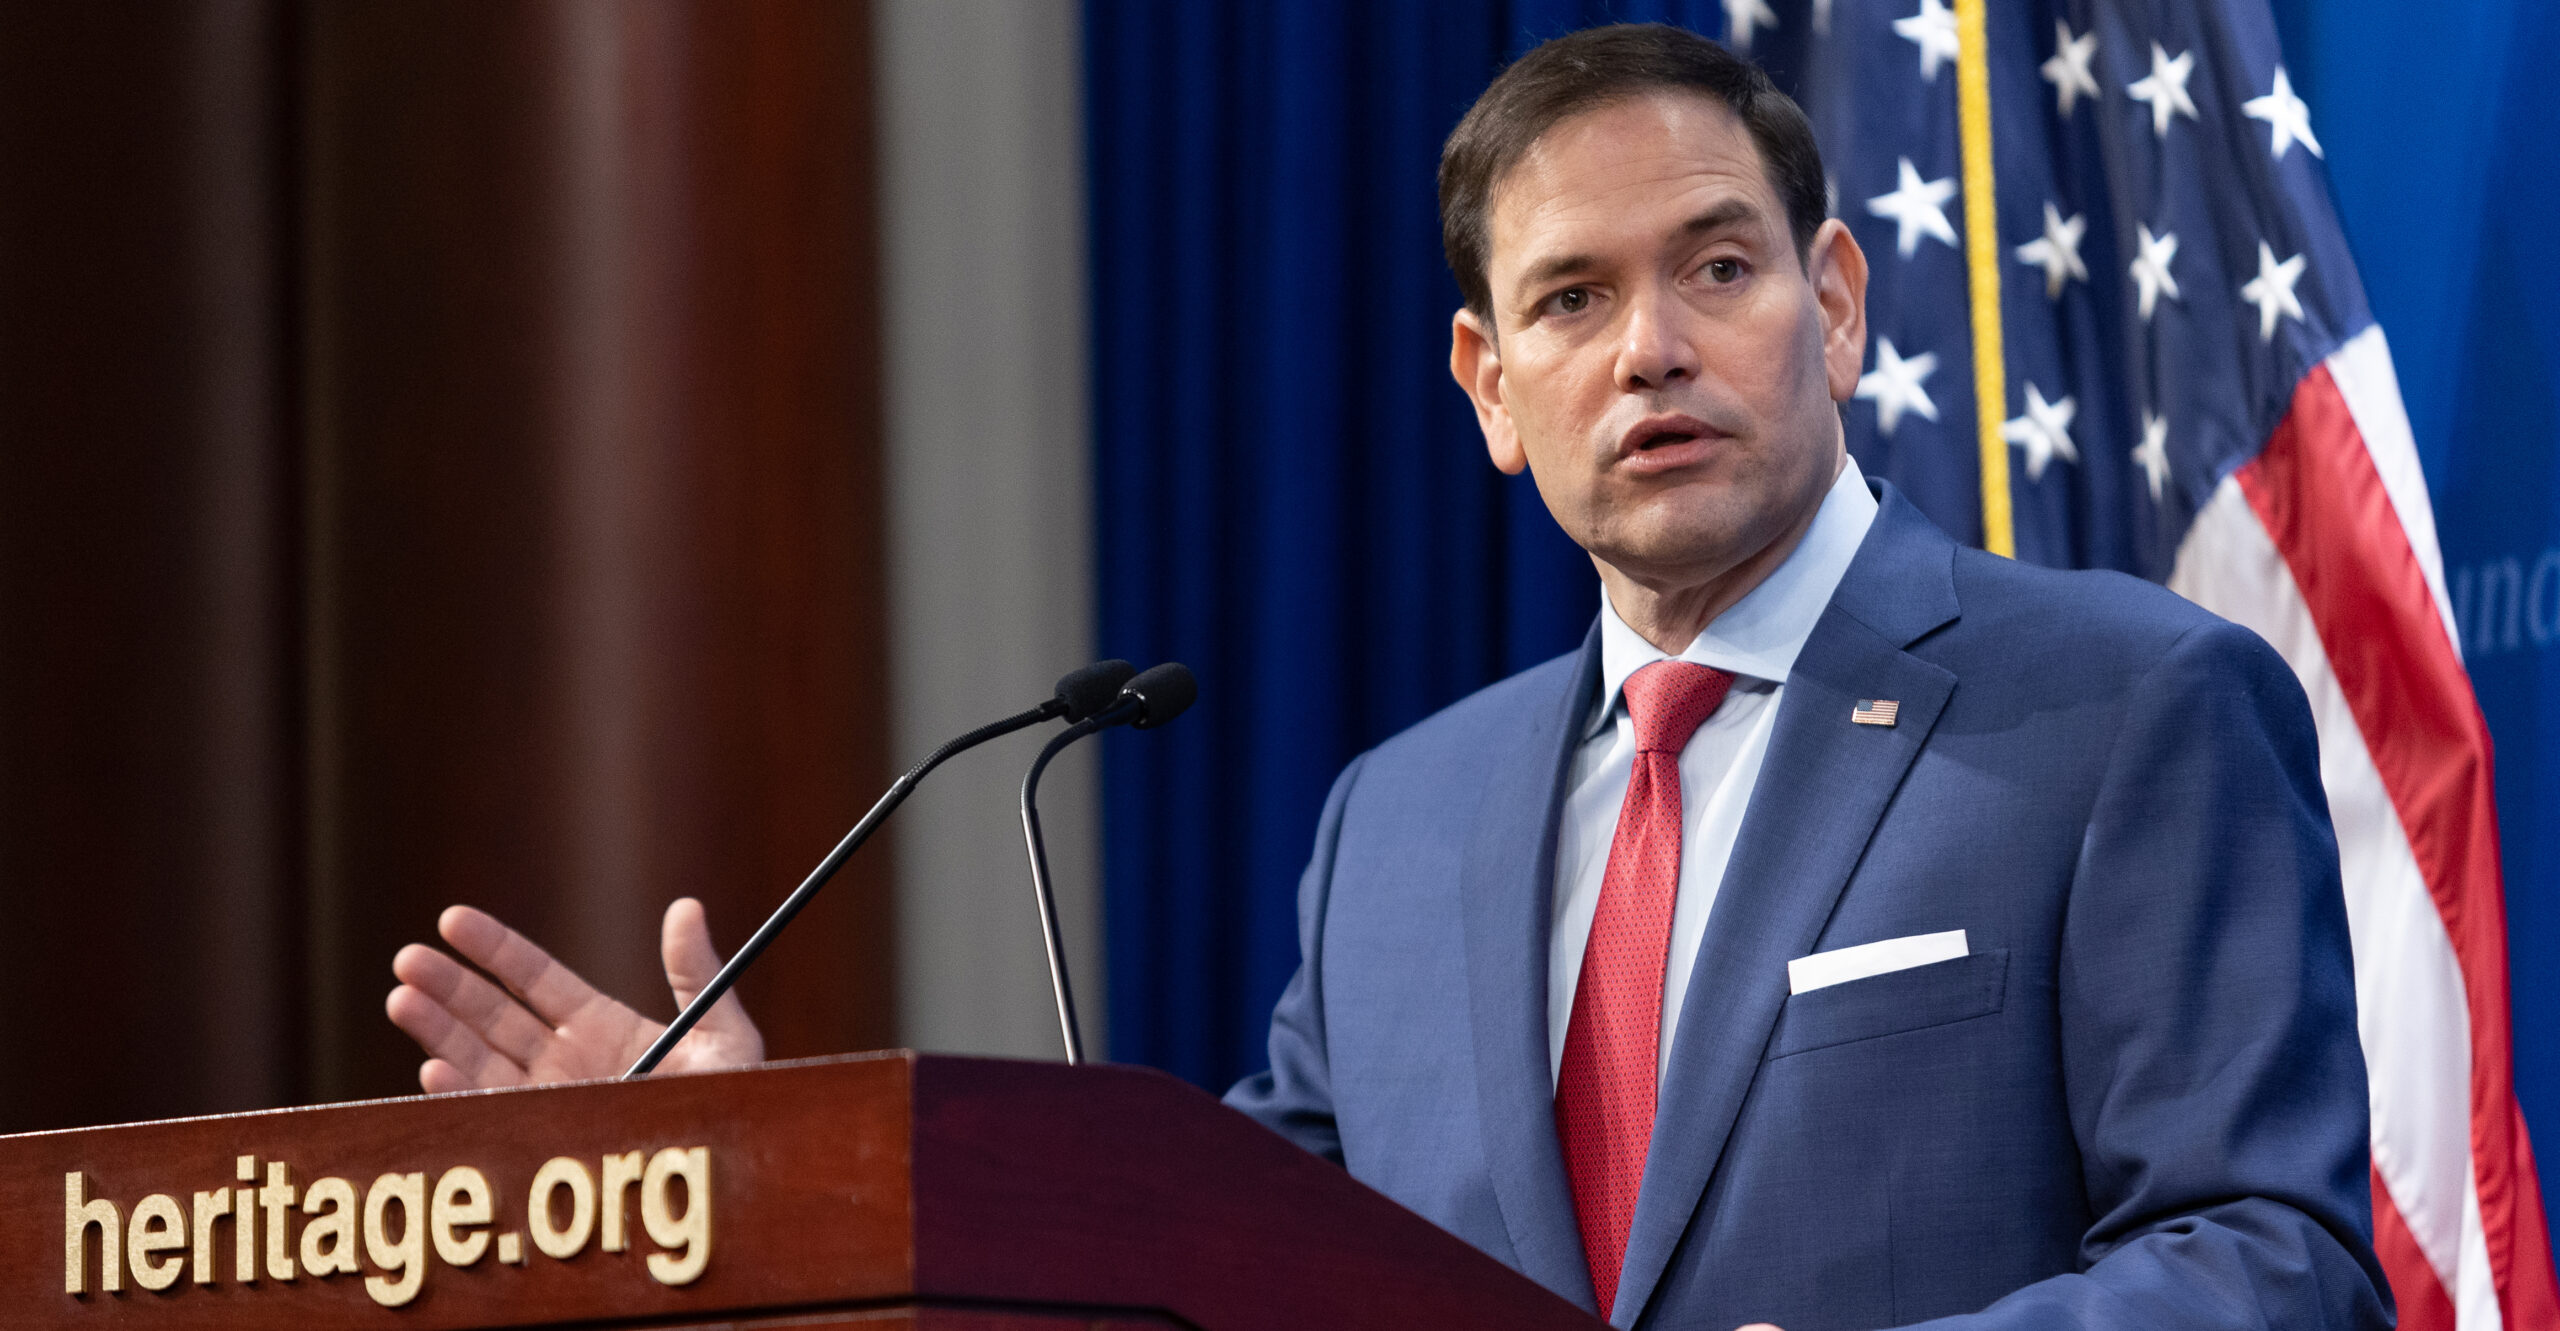 Rubio: What America Does About China Will Define 21st Century